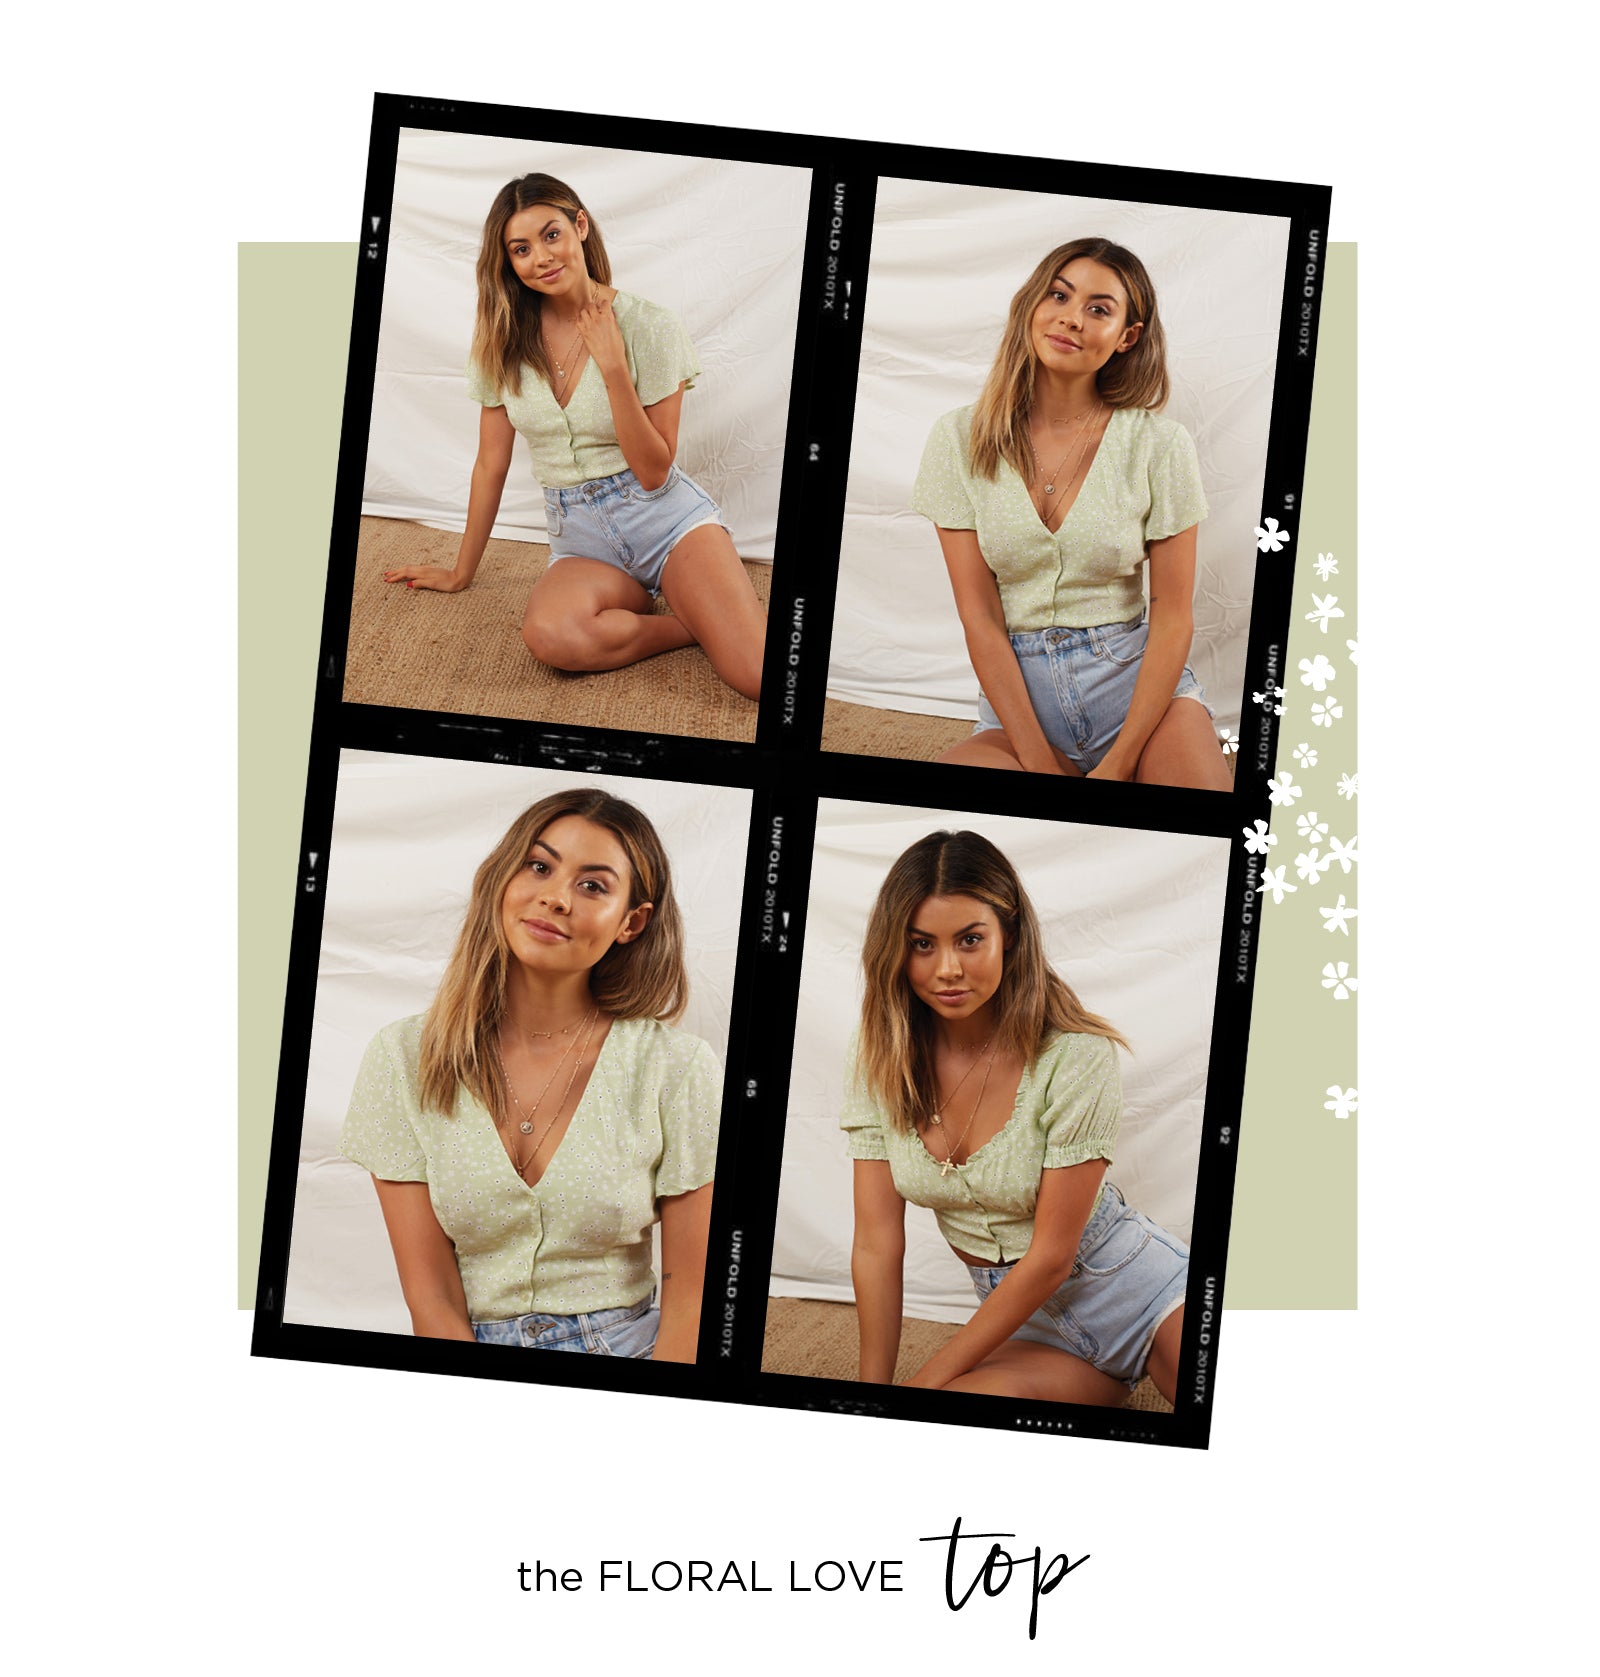 The Floral Love Top